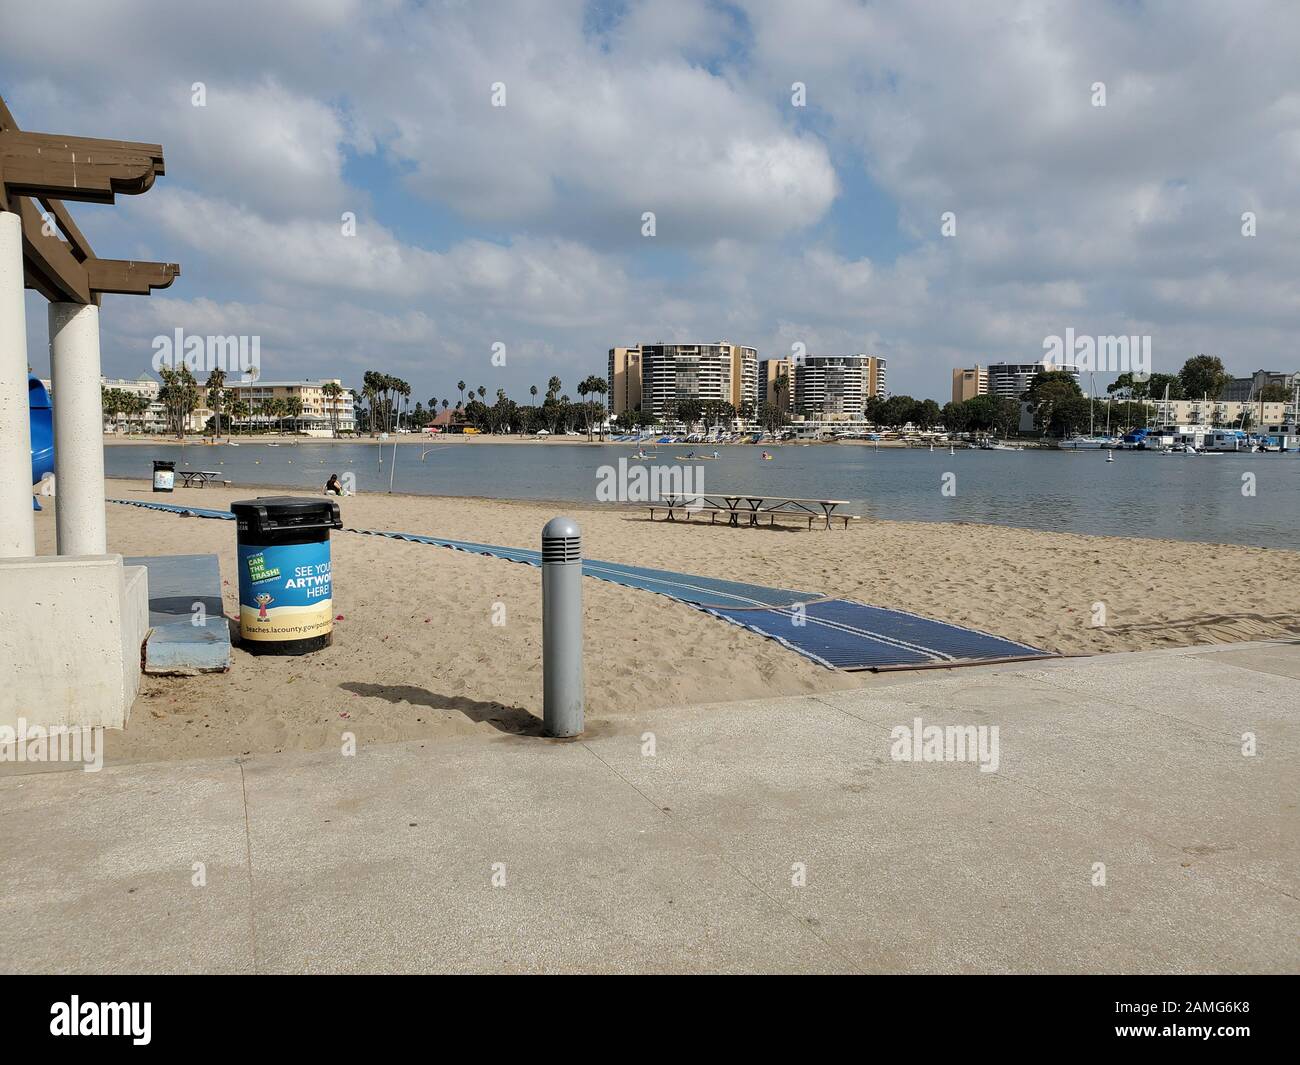 Beach path entrance is visible at Mother's Beach, aka Marina Beach, in Marina Del Rey, Los Angeles, California, October 27, 2019. The temporary paths allow beach access for visitors with strollers, or disabled persons with wheelchairs. () Stock Photo